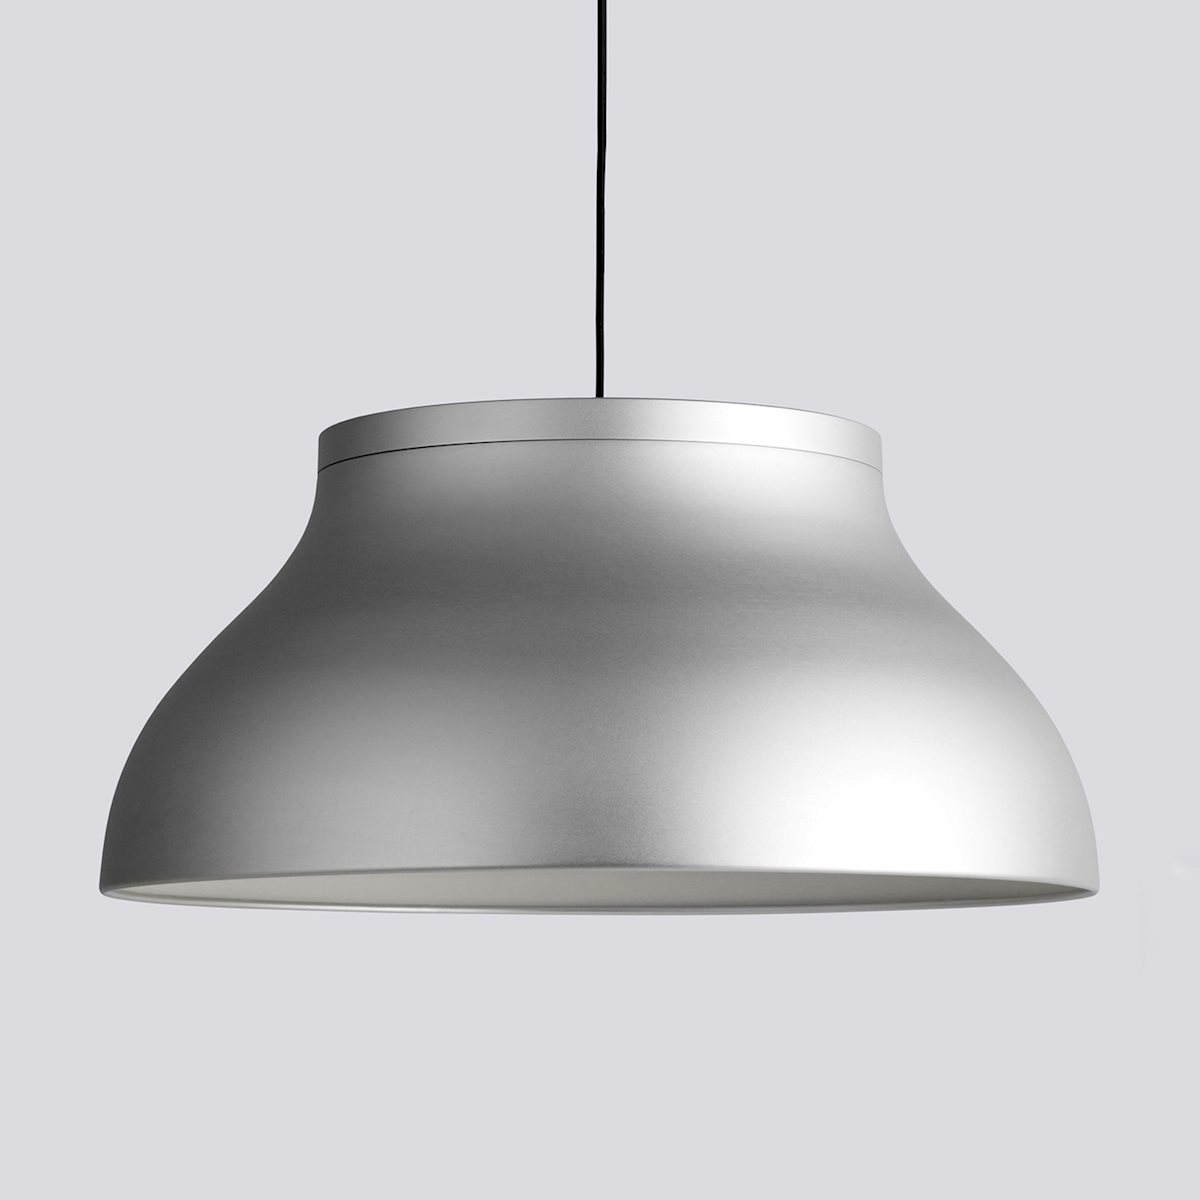 HAY | PC Pendant Large Hanglamp | The Snelle Levering